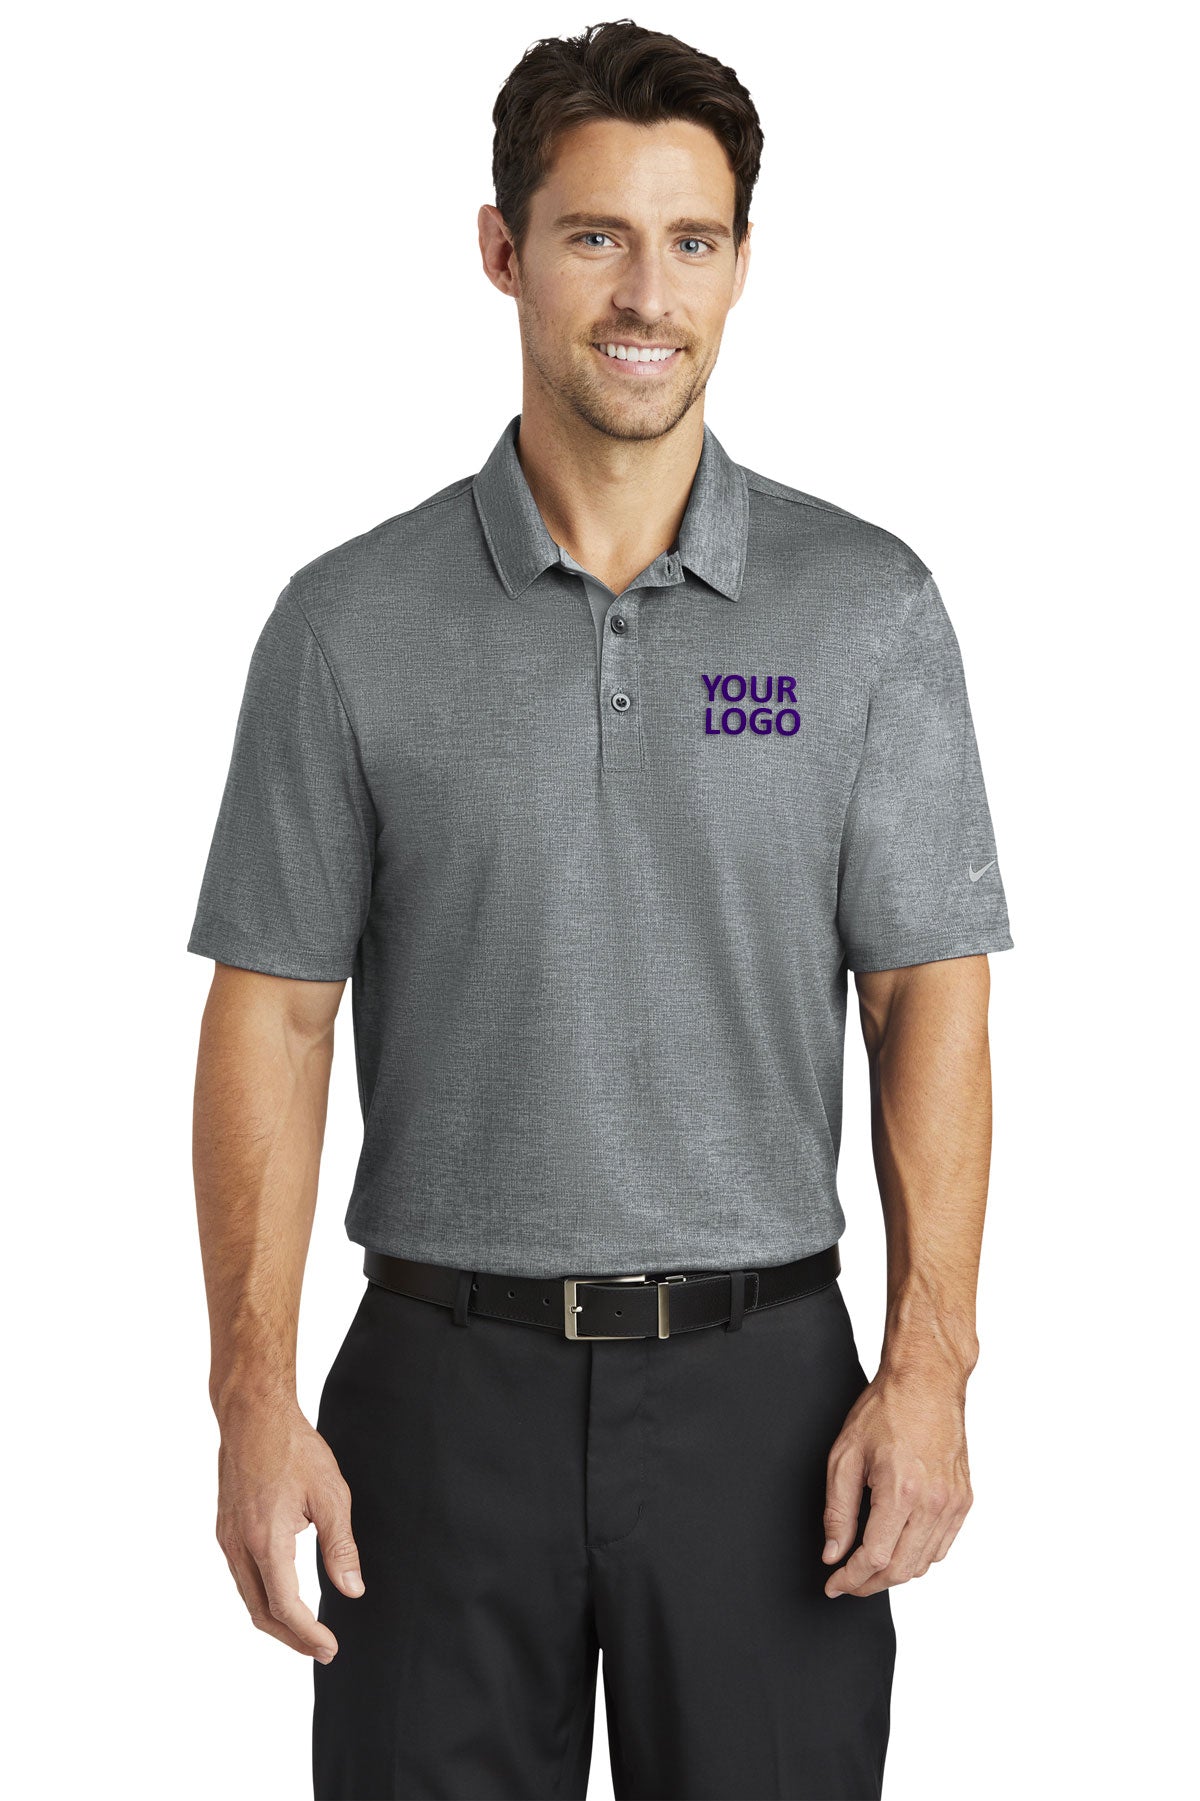 Nike Dri-FIT Crosshatch Polo Cool Grey/ Anthracite